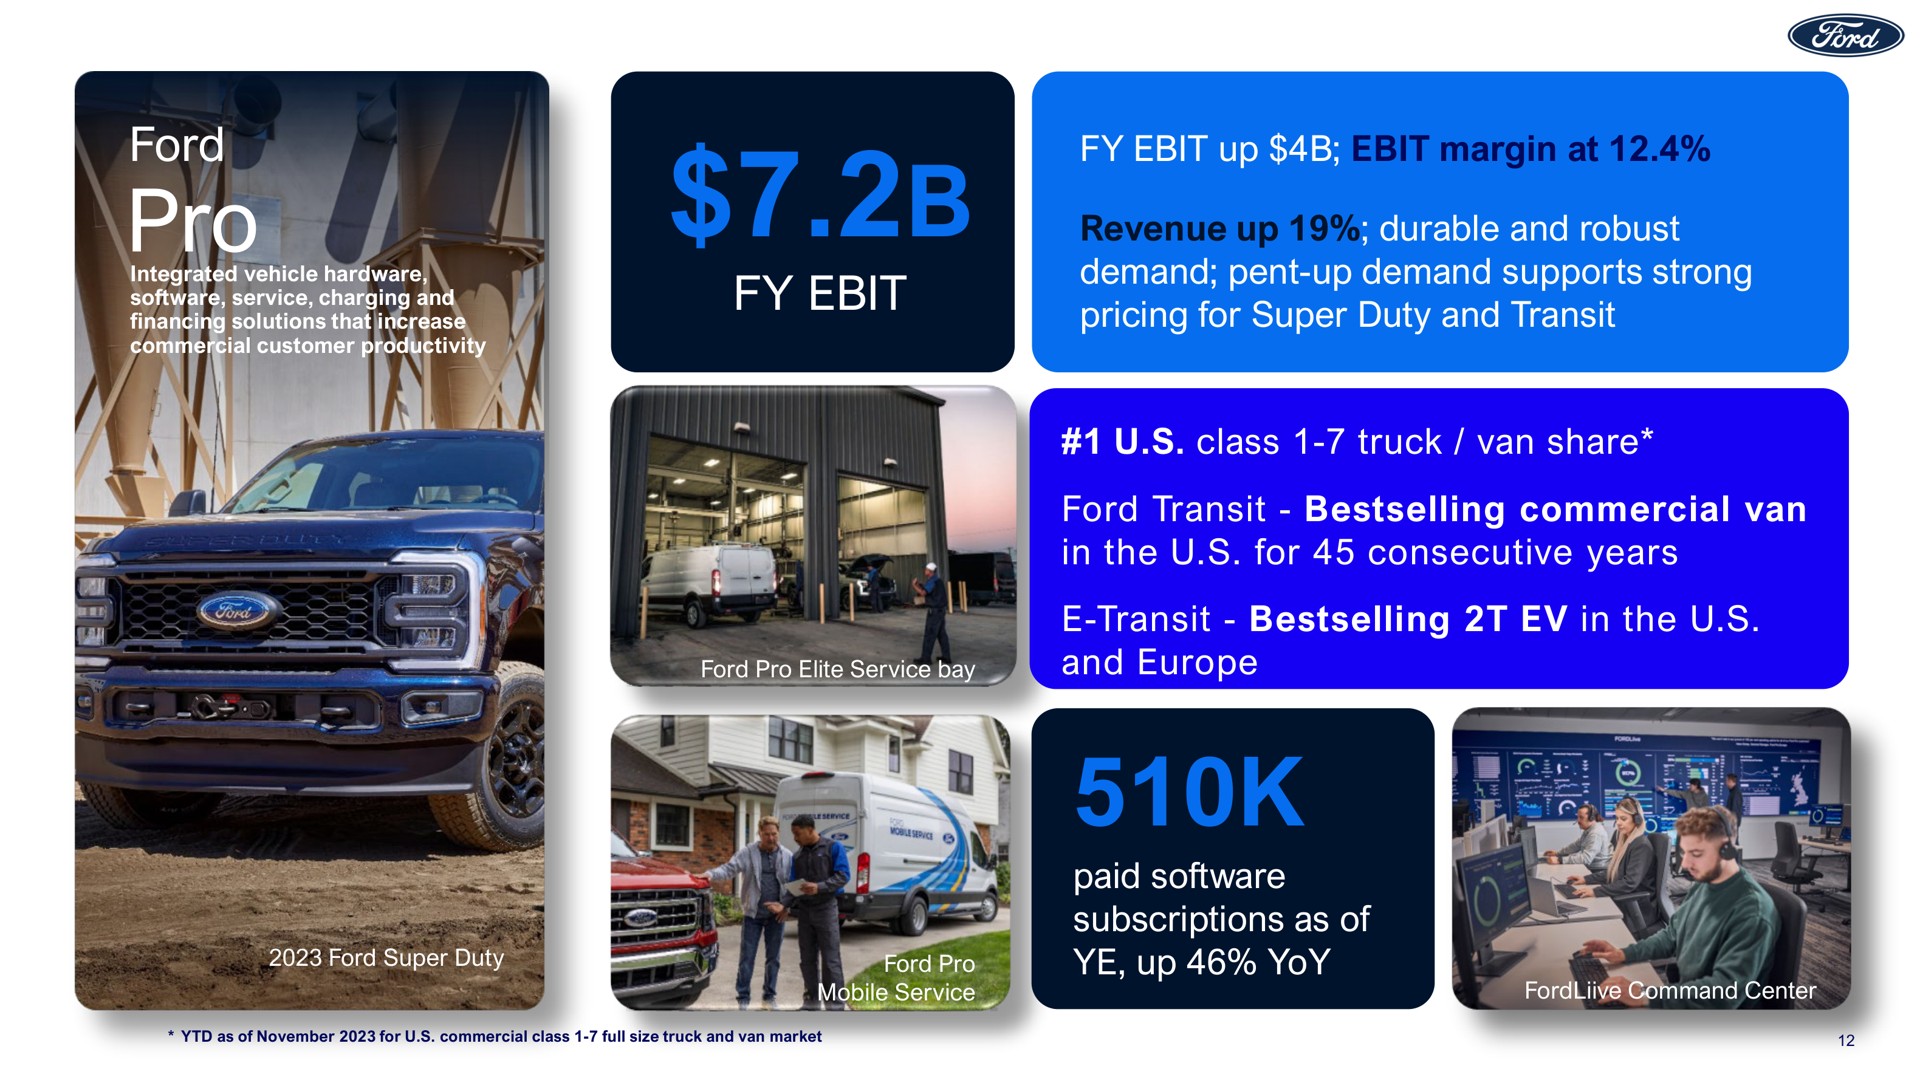 ford pro up margin at revenue up durable and robust demand pent up demand supports strong pricing for super duty and transit class truck van share ford transit commercial van in the for consecutive years transit in the and paid subscriptions as of up yoy | Ford